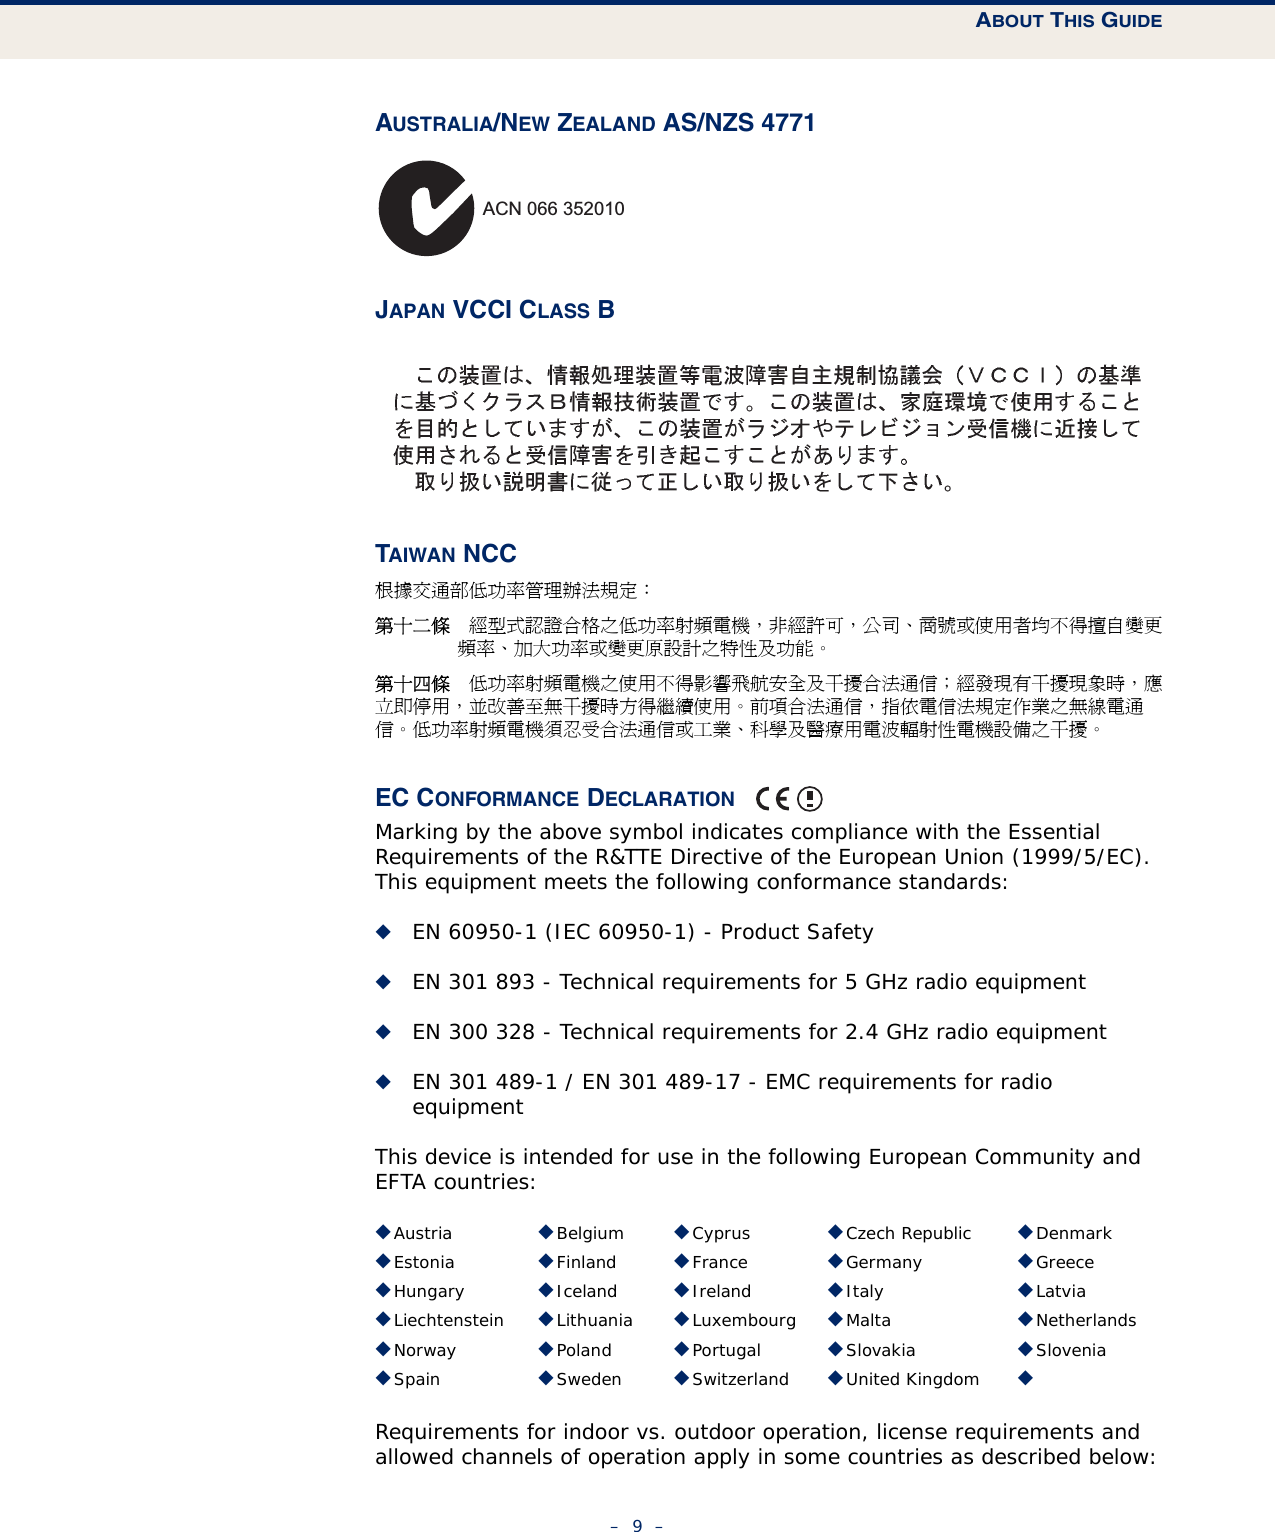 ABOUT THIS GUIDE–  9  –AUSTRALIA/NEW ZEALAND AS/NZS 4771JAPAN VCCI CLASS BTAIWAN NCC根據交通部低功率管理辦法規定：第十二條　經型式認證合格之低功率射頻電機，非經許可，公司、商號或使用者均不得擅自變更頻率、加大功率或變更原設計之特性及功能。第十四條　低功率射頻電機之使用不得影響飛航安全及干擾合法通信；經發現有干擾現象時，應立即停用，並改善至無干擾時方得繼續使用。前項合法通信，指依電信法規定作業之無線電通信。低功率射頻電機須忍受合法通信或工業、科學及醫療用電波輻射性電機設備之干擾。EC CONFORMANCE DECLARATION Marking by the above symbol indicates compliance with the Essential Requirements of the R&amp;TTE Directive of the European Union (1999/5/EC). This equipment meets the following conformance standards:◆EN 60950-1 (IEC 60950-1) - Product Safety◆EN 301 893 - Technical requirements for 5 GHz radio equipment◆EN 300 328 - Technical requirements for 2.4 GHz radio equipment◆EN 301 489-1 / EN 301 489-17 - EMC requirements for radio equipmentThis device is intended for use in the following European Community and EFTA countries:  Requirements for indoor vs. outdoor operation, license requirements and allowed channels of operation apply in some countries as described below:◆Austria ◆Belgium ◆Cyprus ◆Czech Republic ◆Denmark◆Estonia ◆Finland ◆France ◆Germany ◆Greece◆Hungary ◆Iceland ◆Ireland ◆Italy ◆Latvia◆Liechtenstein ◆Lithuania ◆Luxembourg ◆Malta ◆Netherlands◆Norway ◆Poland ◆Portugal ◆Slovakia ◆Slovenia◆Spain ◆Sweden ◆Switzerland ◆United Kingdom ◆ACN 066 352010